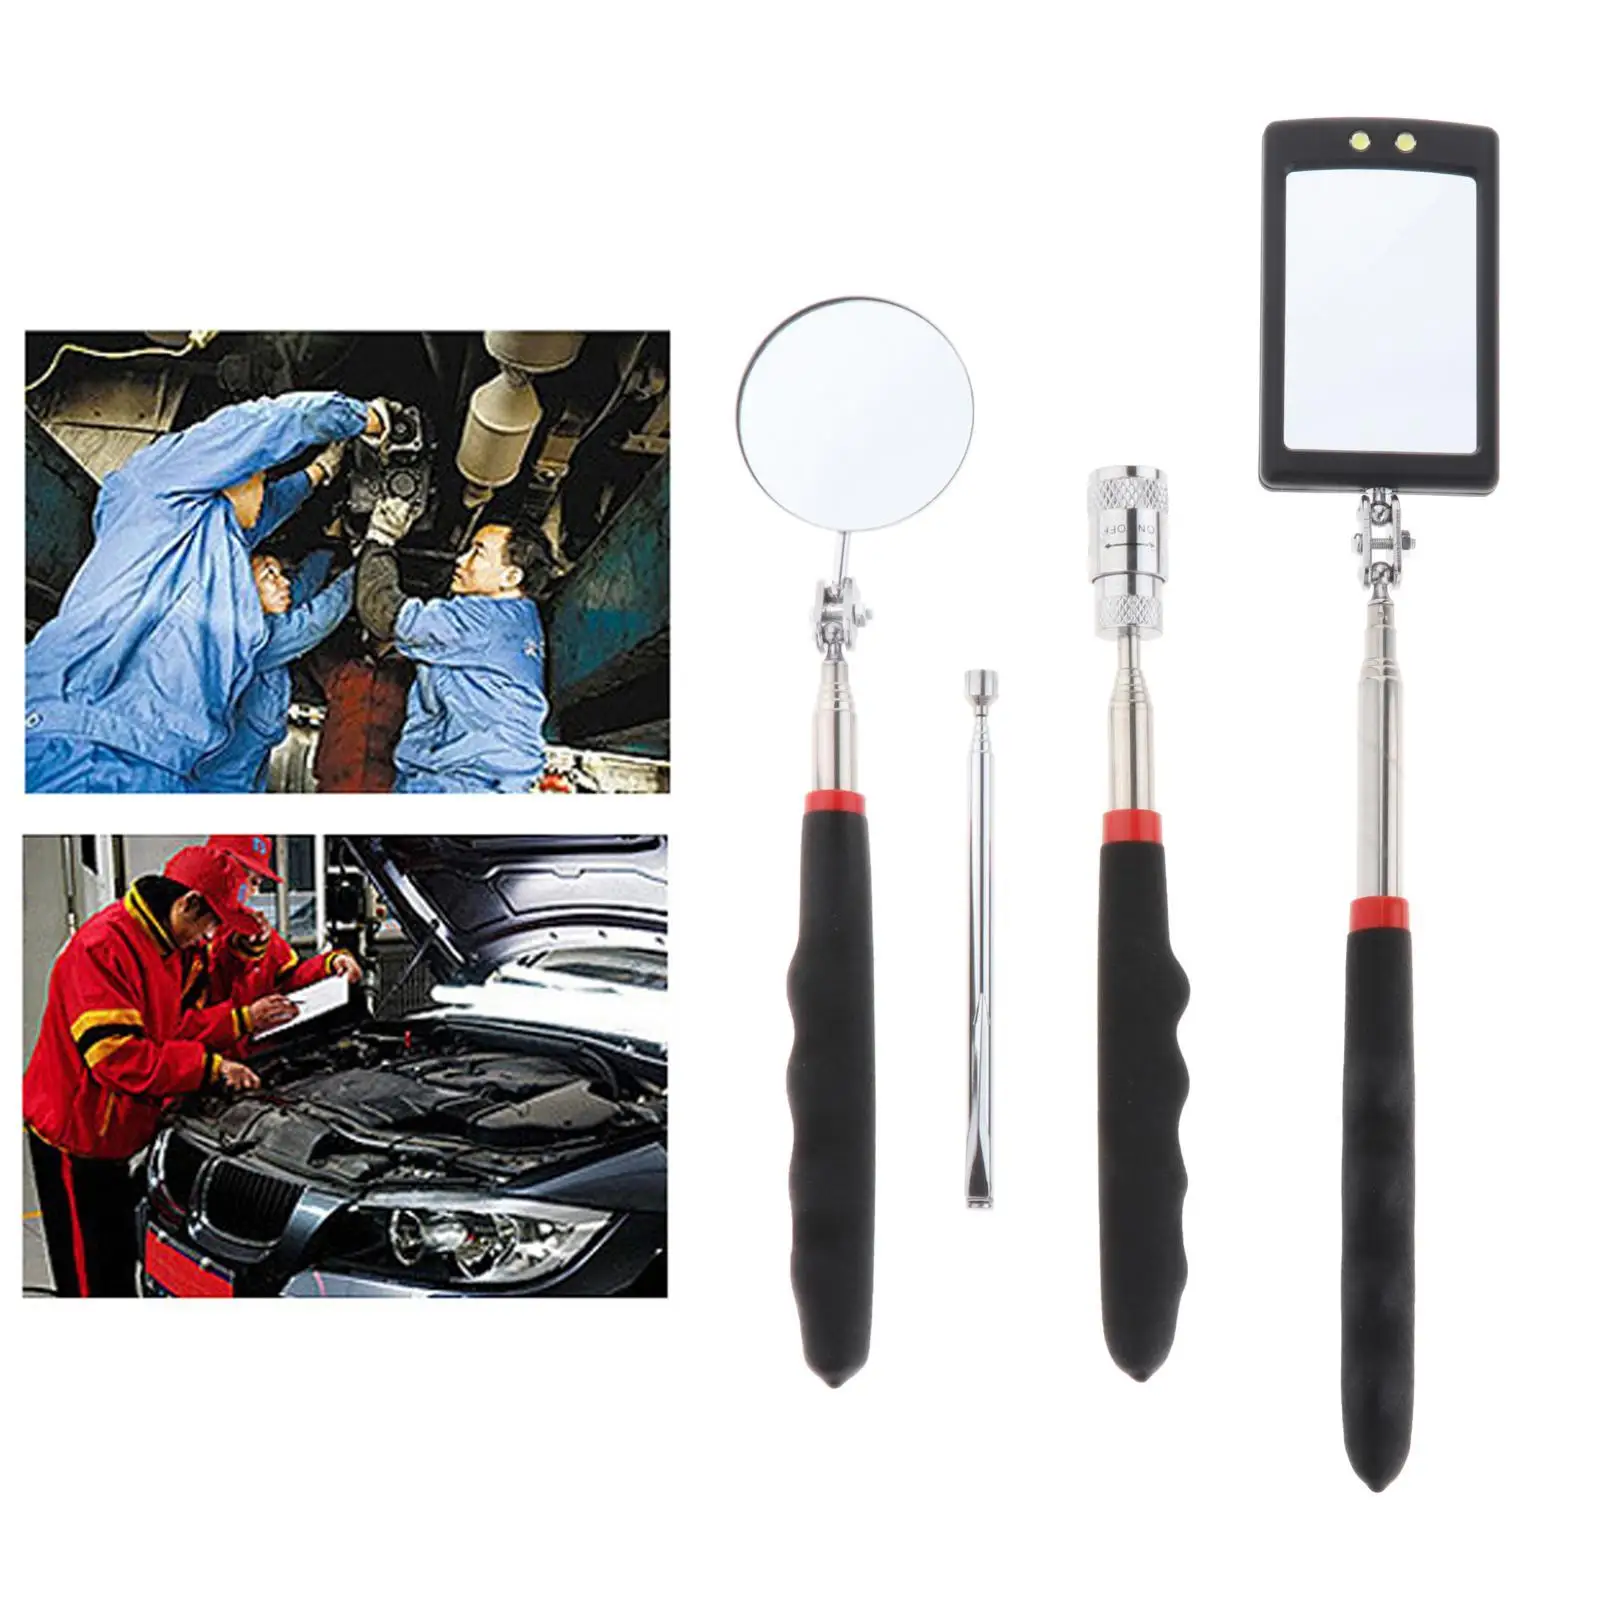 Telescoping Pick-, Retractable, with Handle, Portable with Pick up Rod Hand for Car Maintenance